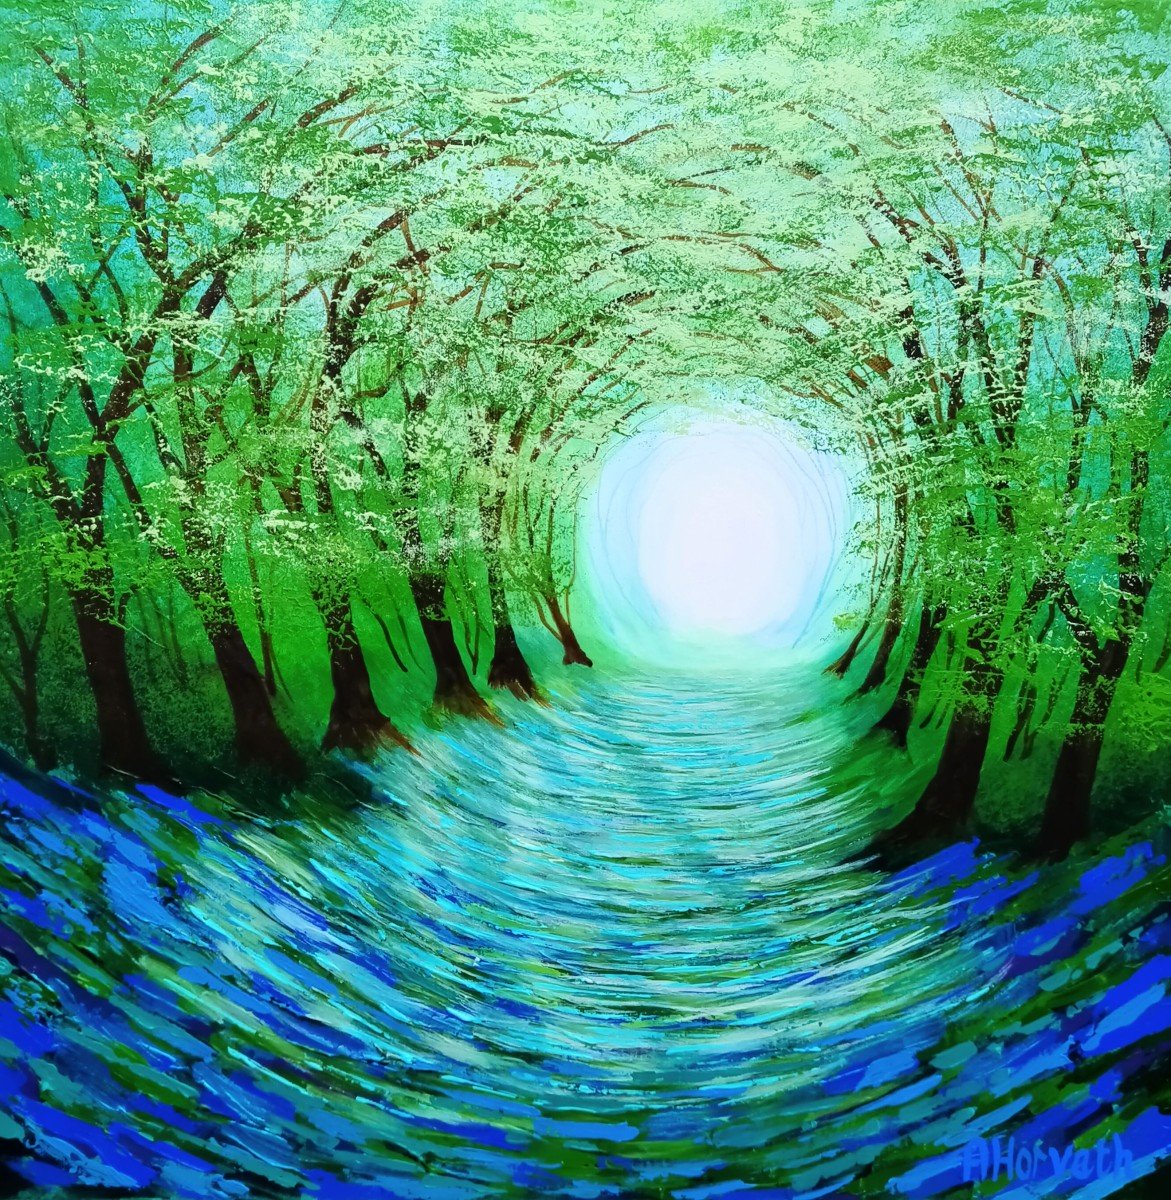 Amanda Horvath's A Distant Light, acrylic on canvas painting.